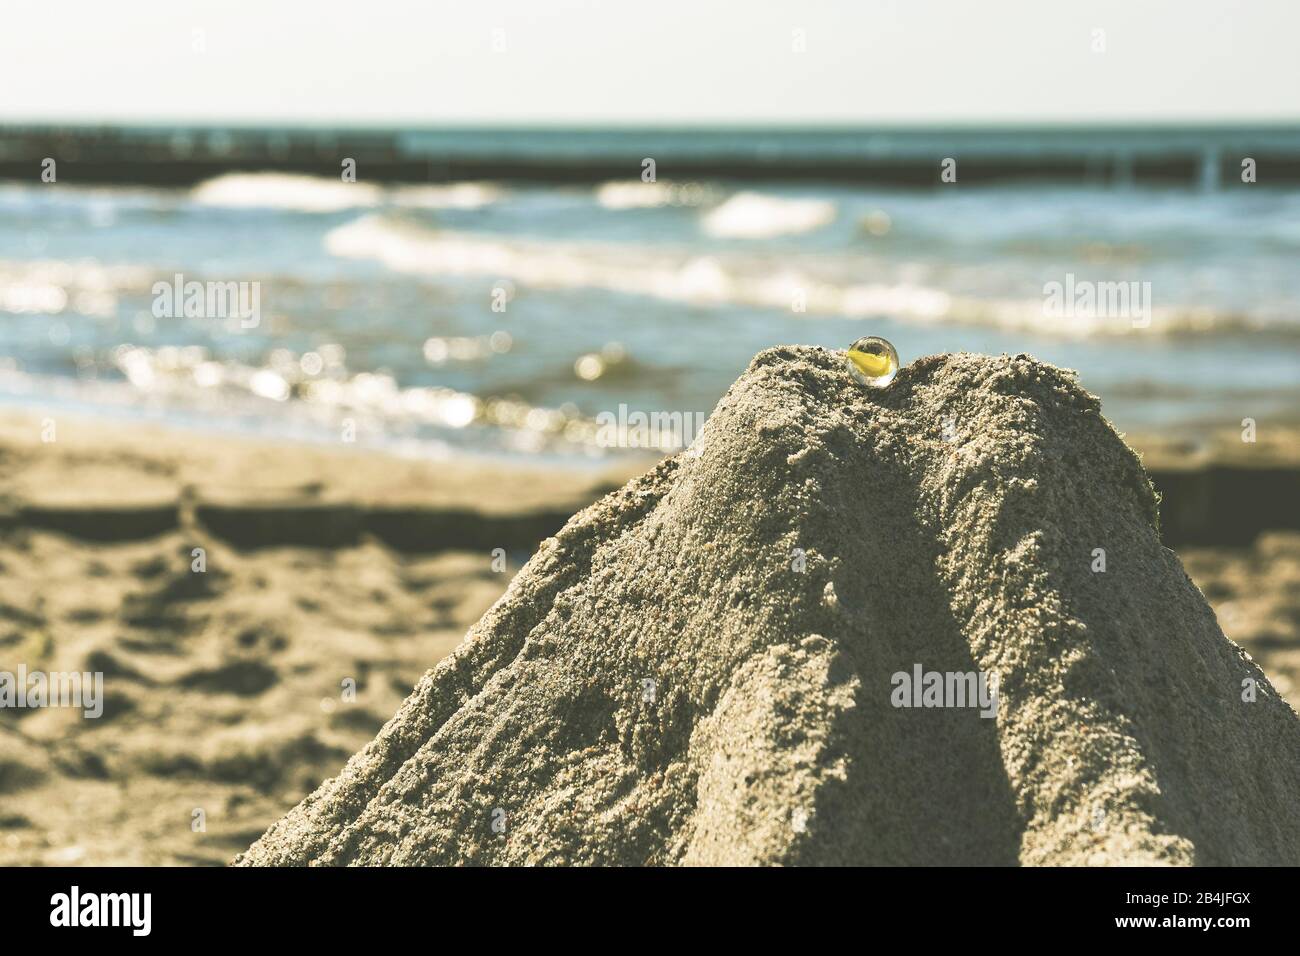 Close-up of sandcastle with glass marbles on the beach of the Baltic Sea, the sea in blur in the background Stock Photo